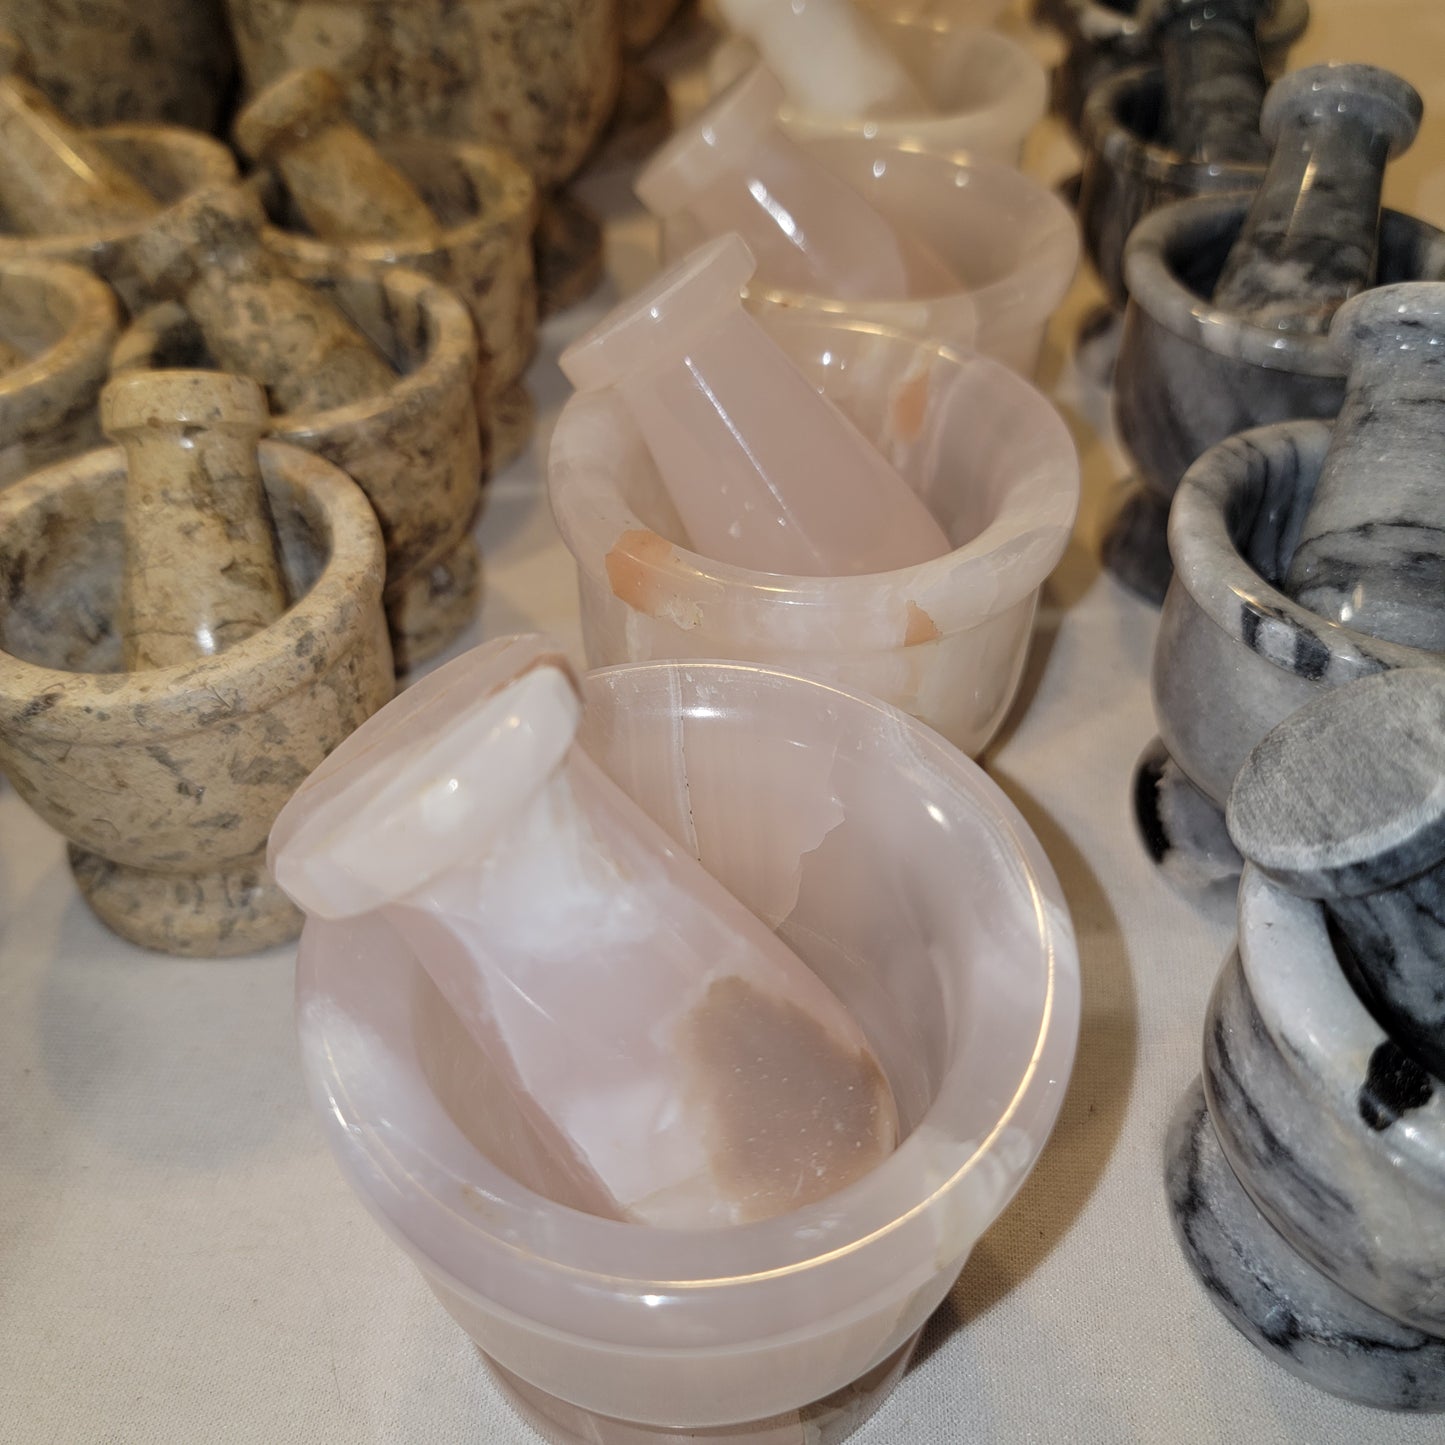 Mortar and Pestle Collection: Explore Your Options